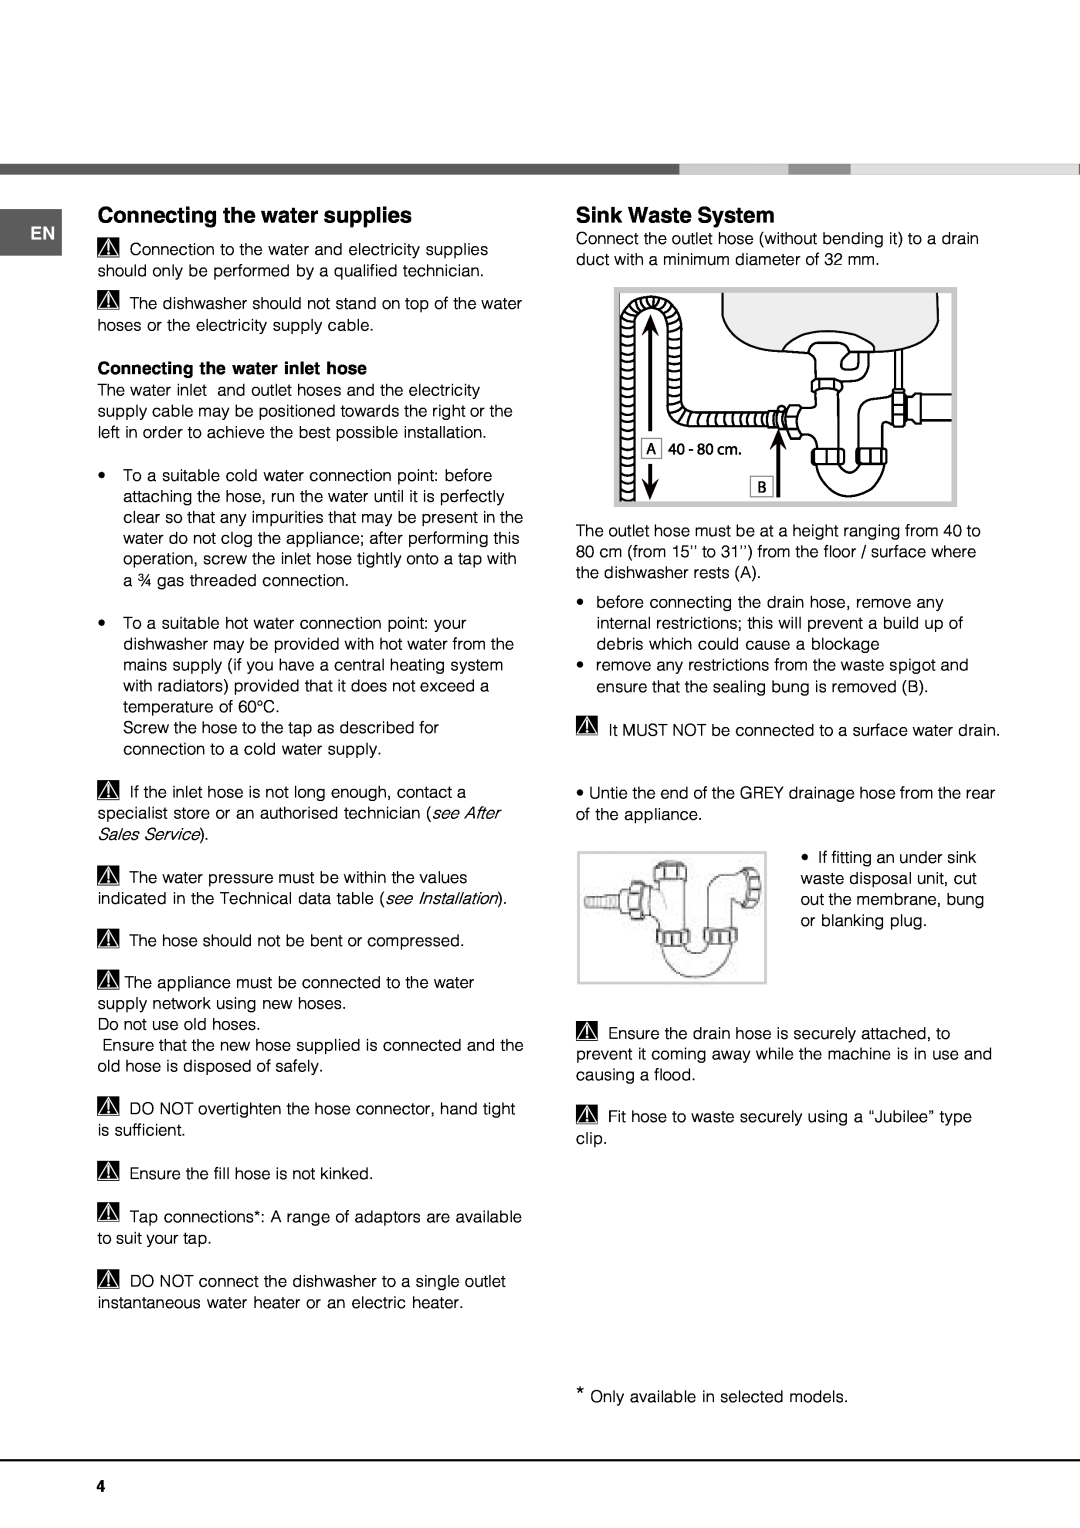 Hotpoint lft 114 manual Connecting the water supplies, Sink Waste System, Connecting the water inlet hose 